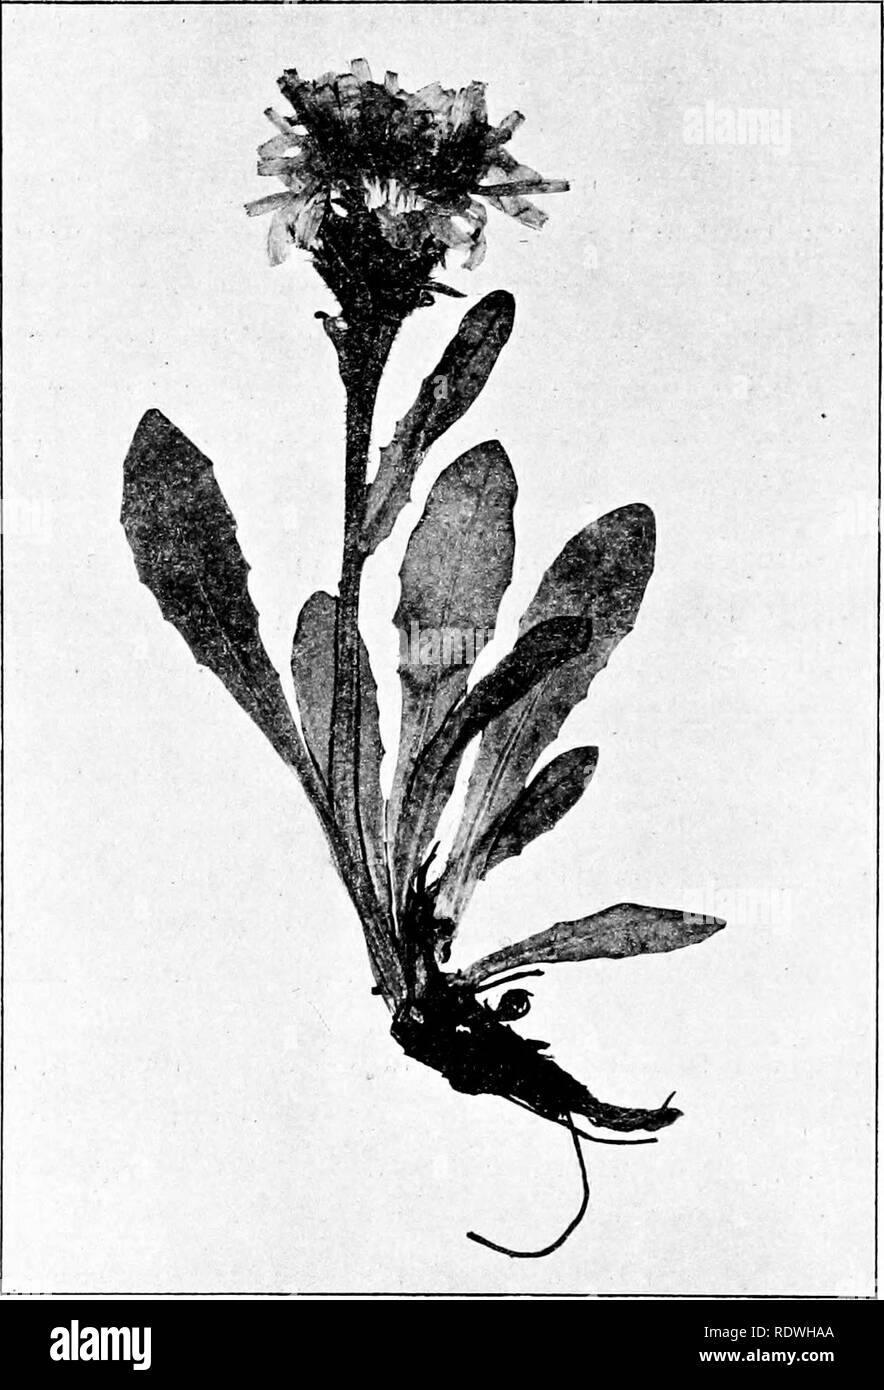 . The vegetation of the Siberian-Mongolian frontiers (the Sayansk region). Botany; Botany. The stems are low, 6—8 cm. long, only slightly overtopping the leaves. Of pretty com- mon occurrence in the Altaian, above the tree limit, growing among lichens and mosses. Flowering and with half ripe achenes at the end of July. Distribution: Arctic Russia and Siberia, Sayansk mountains, northern Mongolia, Trans Baikal.. Fig. 115. Crepis chrysantha (Ledeb.) Turczan. (Vi). Crcpis sibirica L. Spec. PI. ed. II (1763) p. 1135; Turczan. Cat. Baical. no. 711; Karel. et Kiril. Enum. PI. Fl. Alt. no. 559; Ledeb Stock Photo